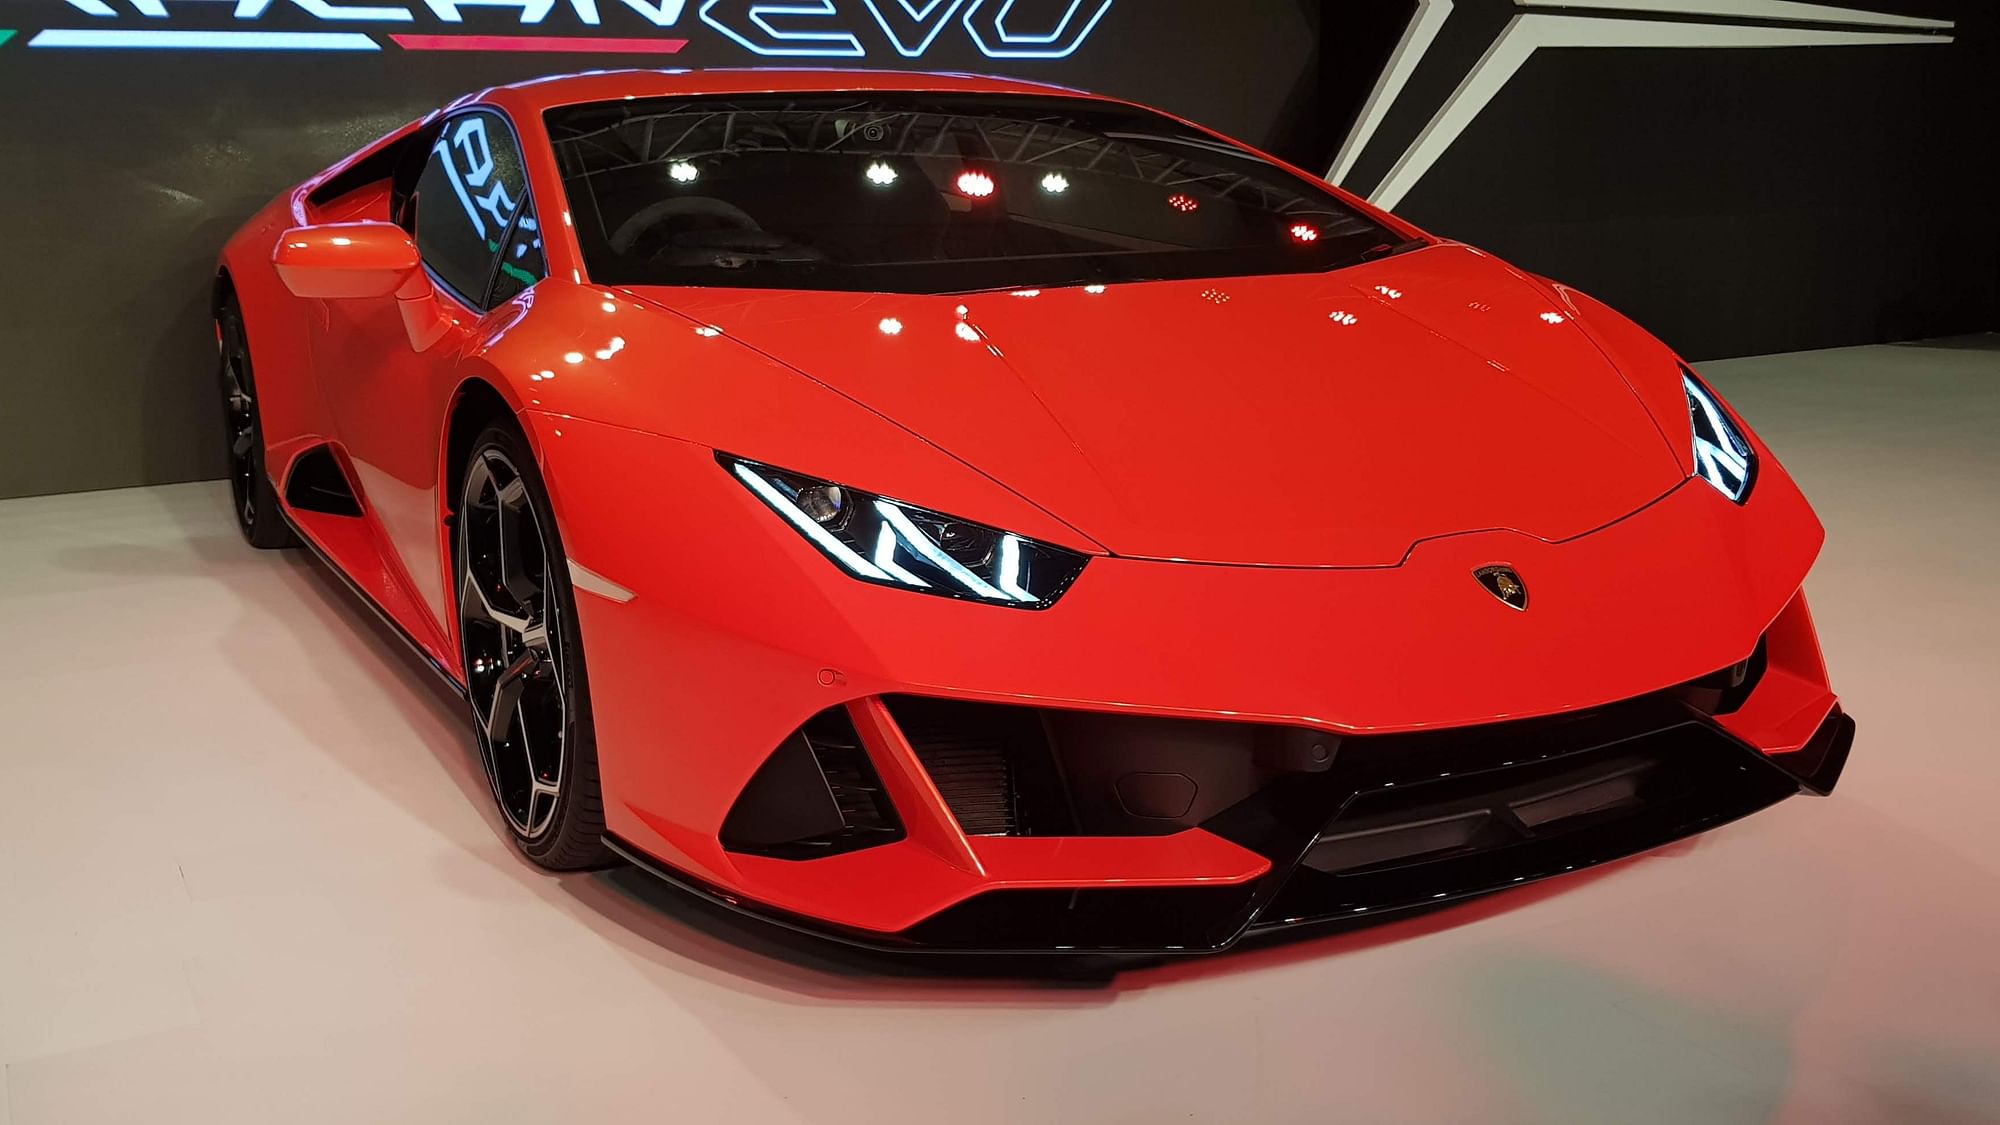 Huracan Evo Spyder Launches in India for Over 4 Crores